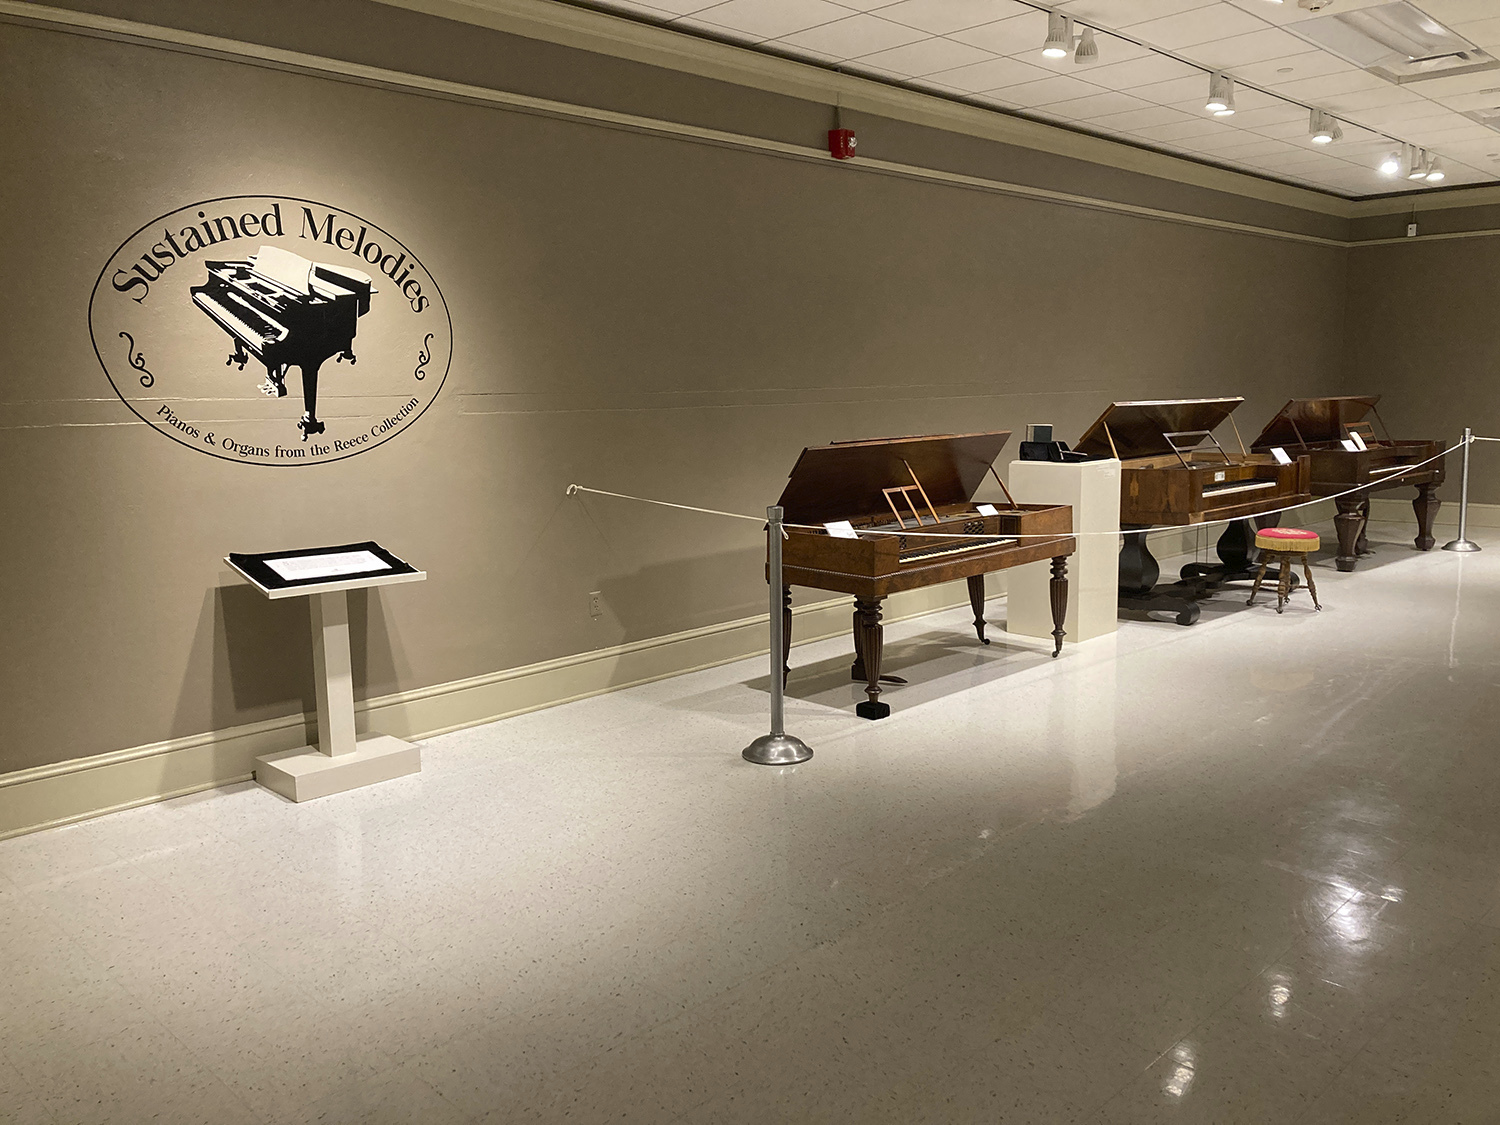 "Sustained Melodies," an exhibition featuring 10 pianos and pump organs, is on display through Sept. 10.